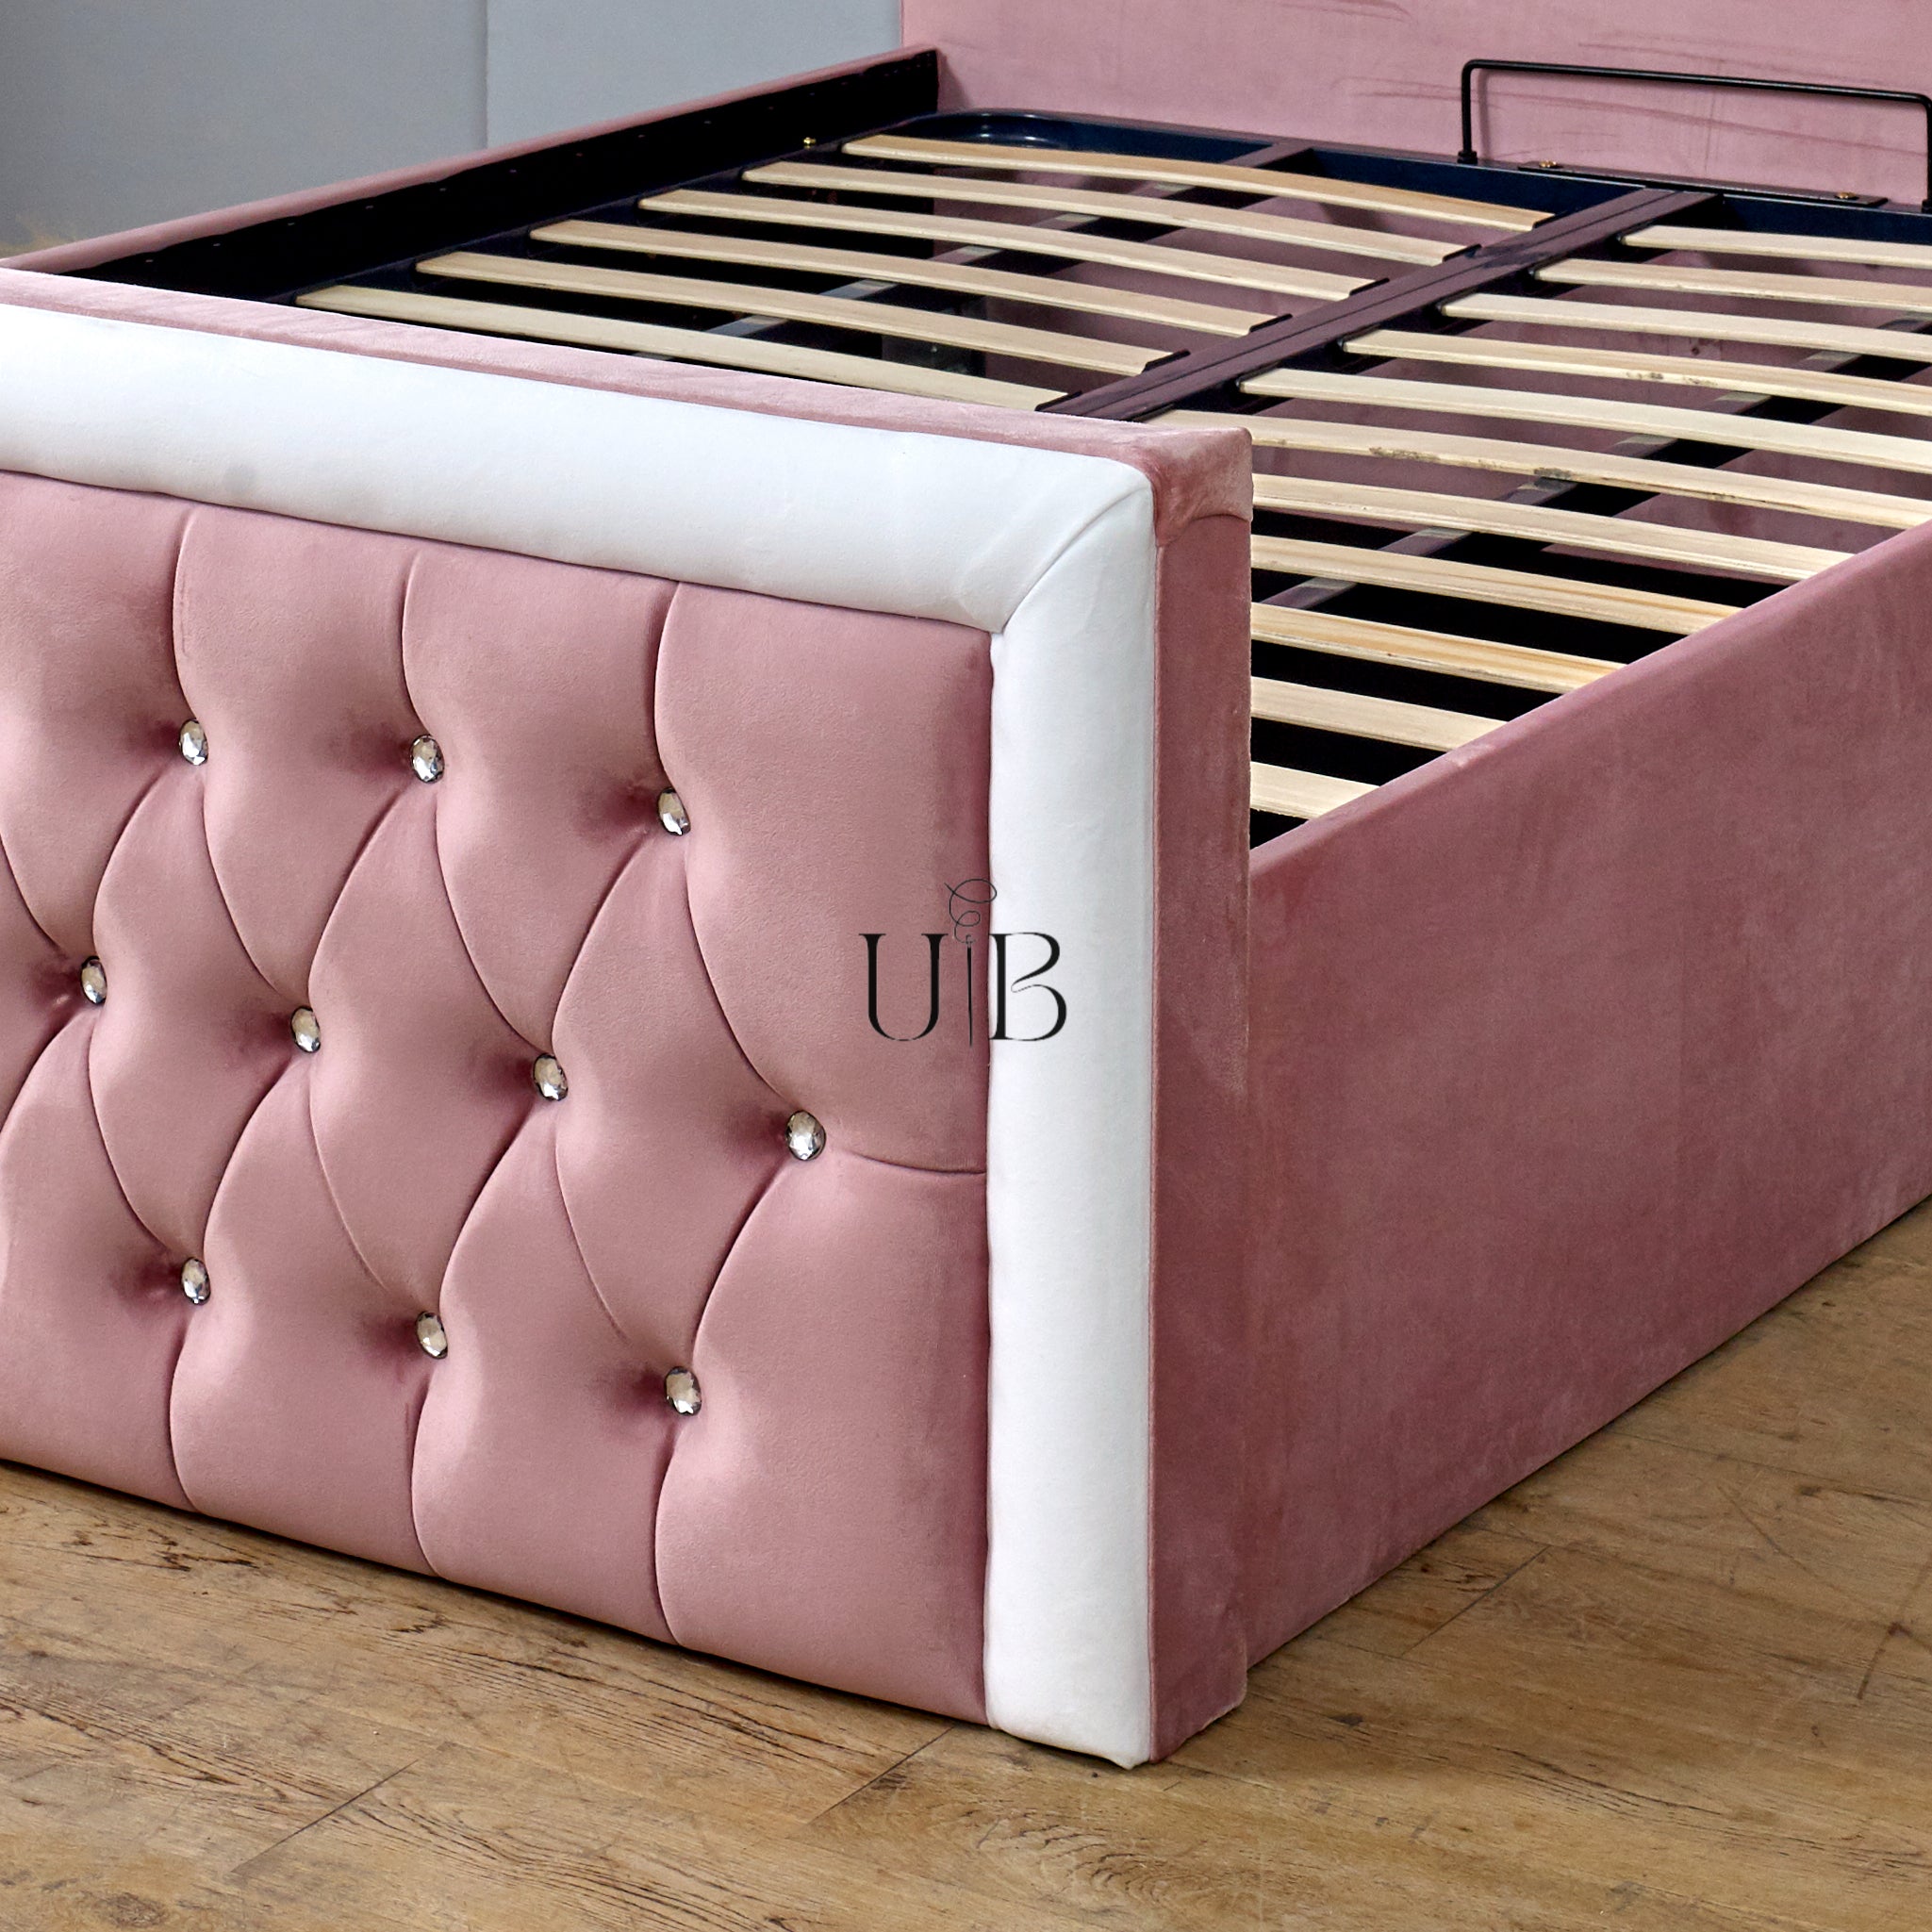 Silhouette Chesterfield Bed Frame